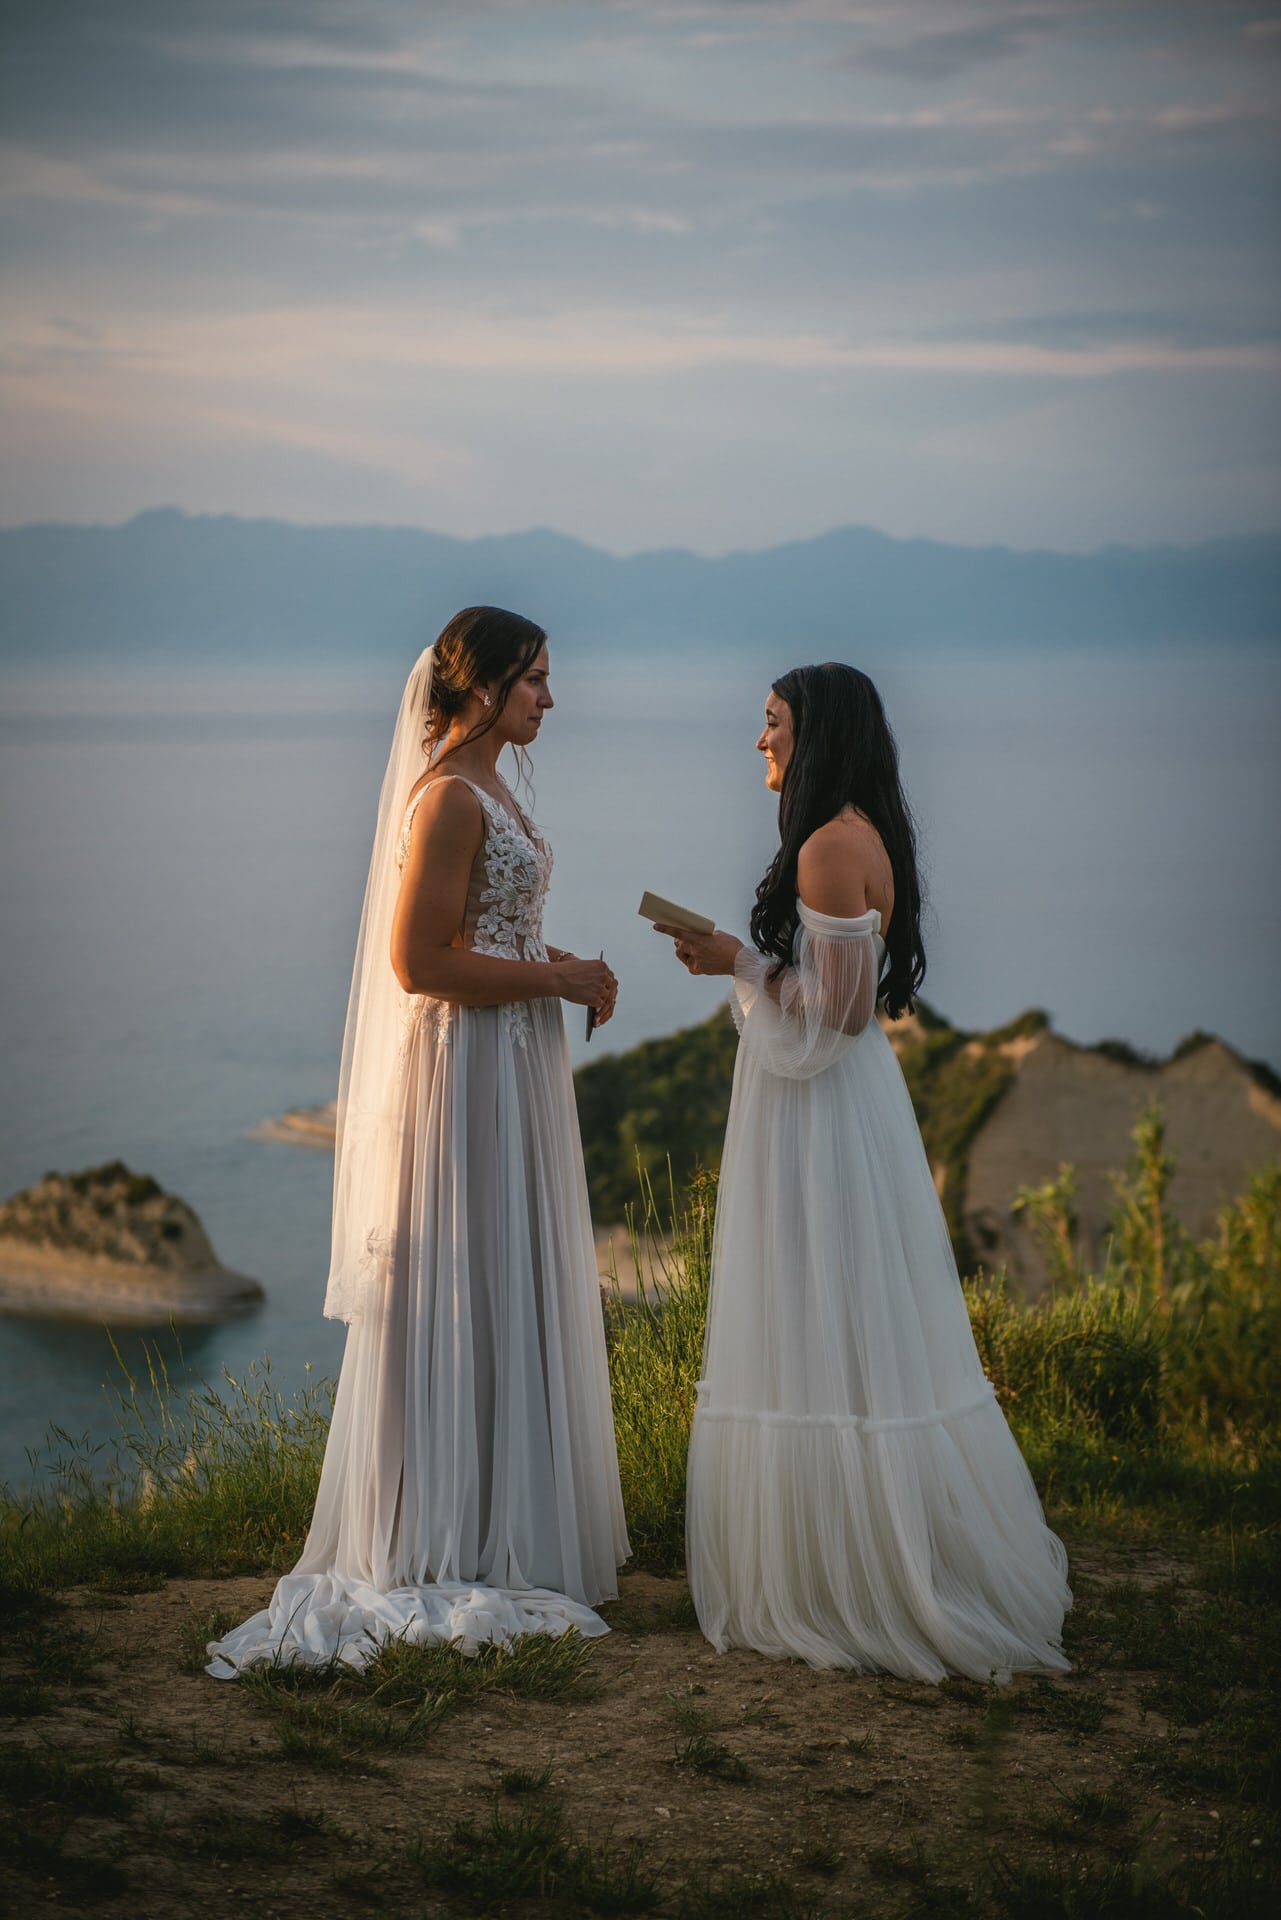 The couple's happiness radiating during their heartfelt Corfu elopement ceremony.